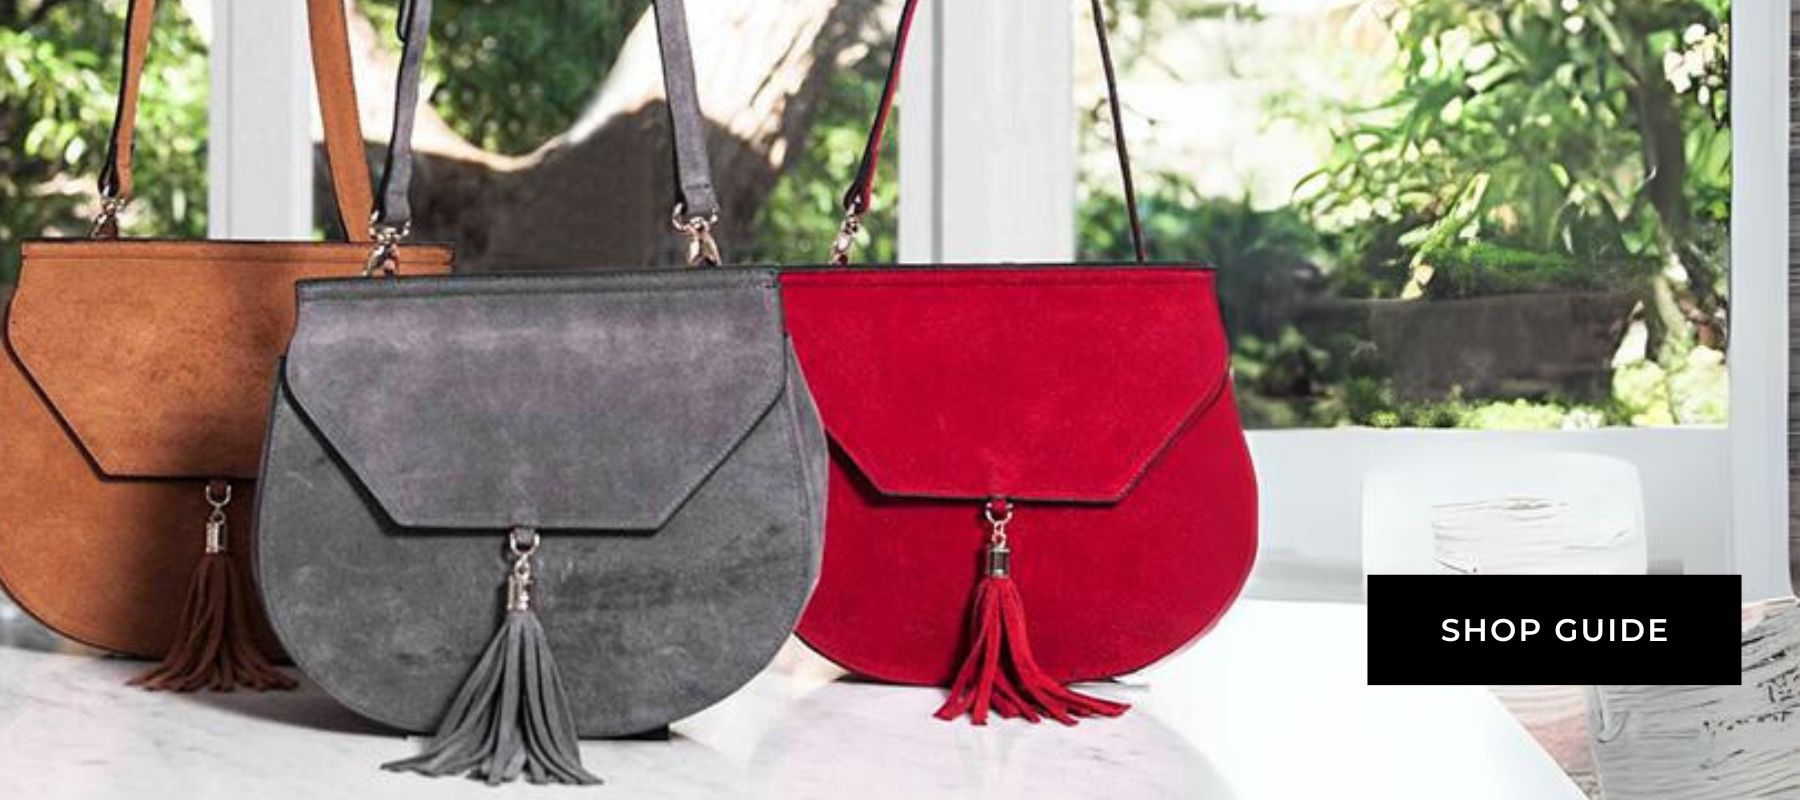 Leather Handbags for Sale | BeltNBags